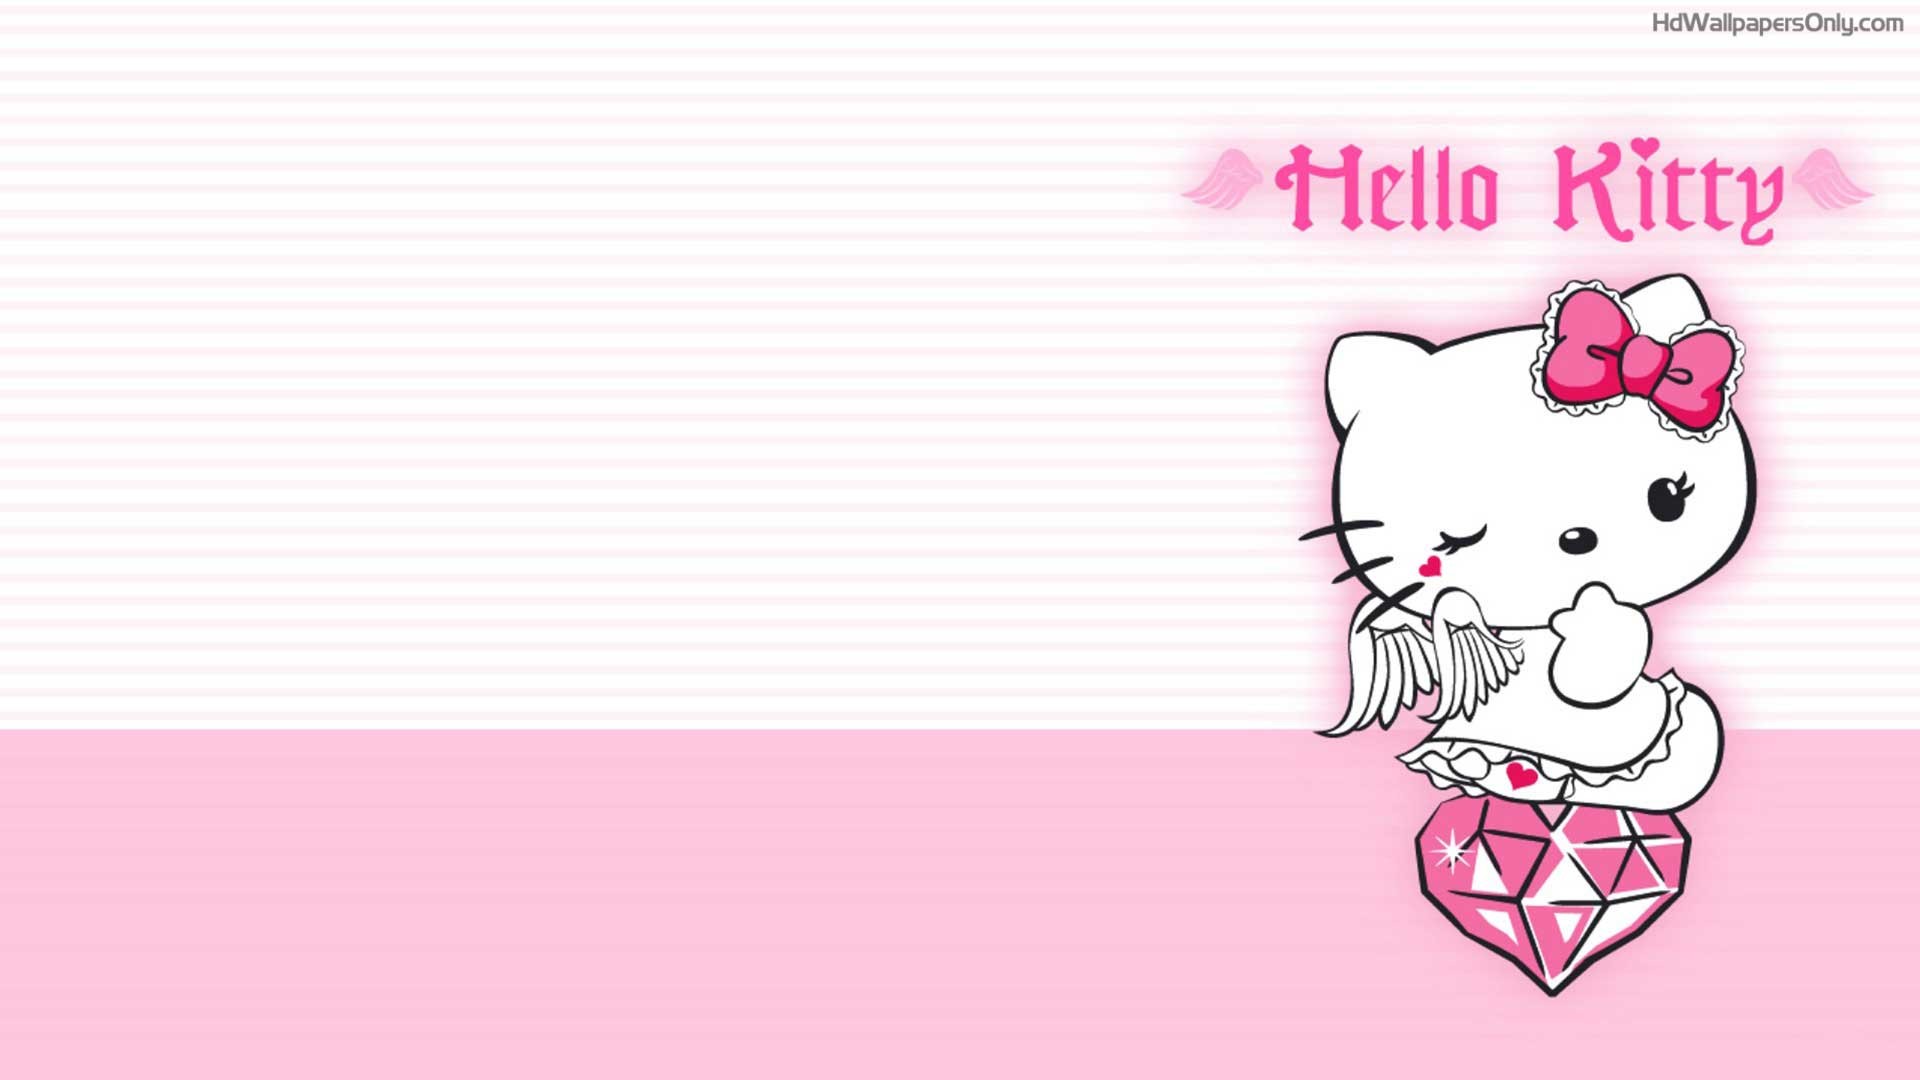 1920x1080 Hello Kitty Wallpapers HD - Hd WallpapersHD Wallpapers Only